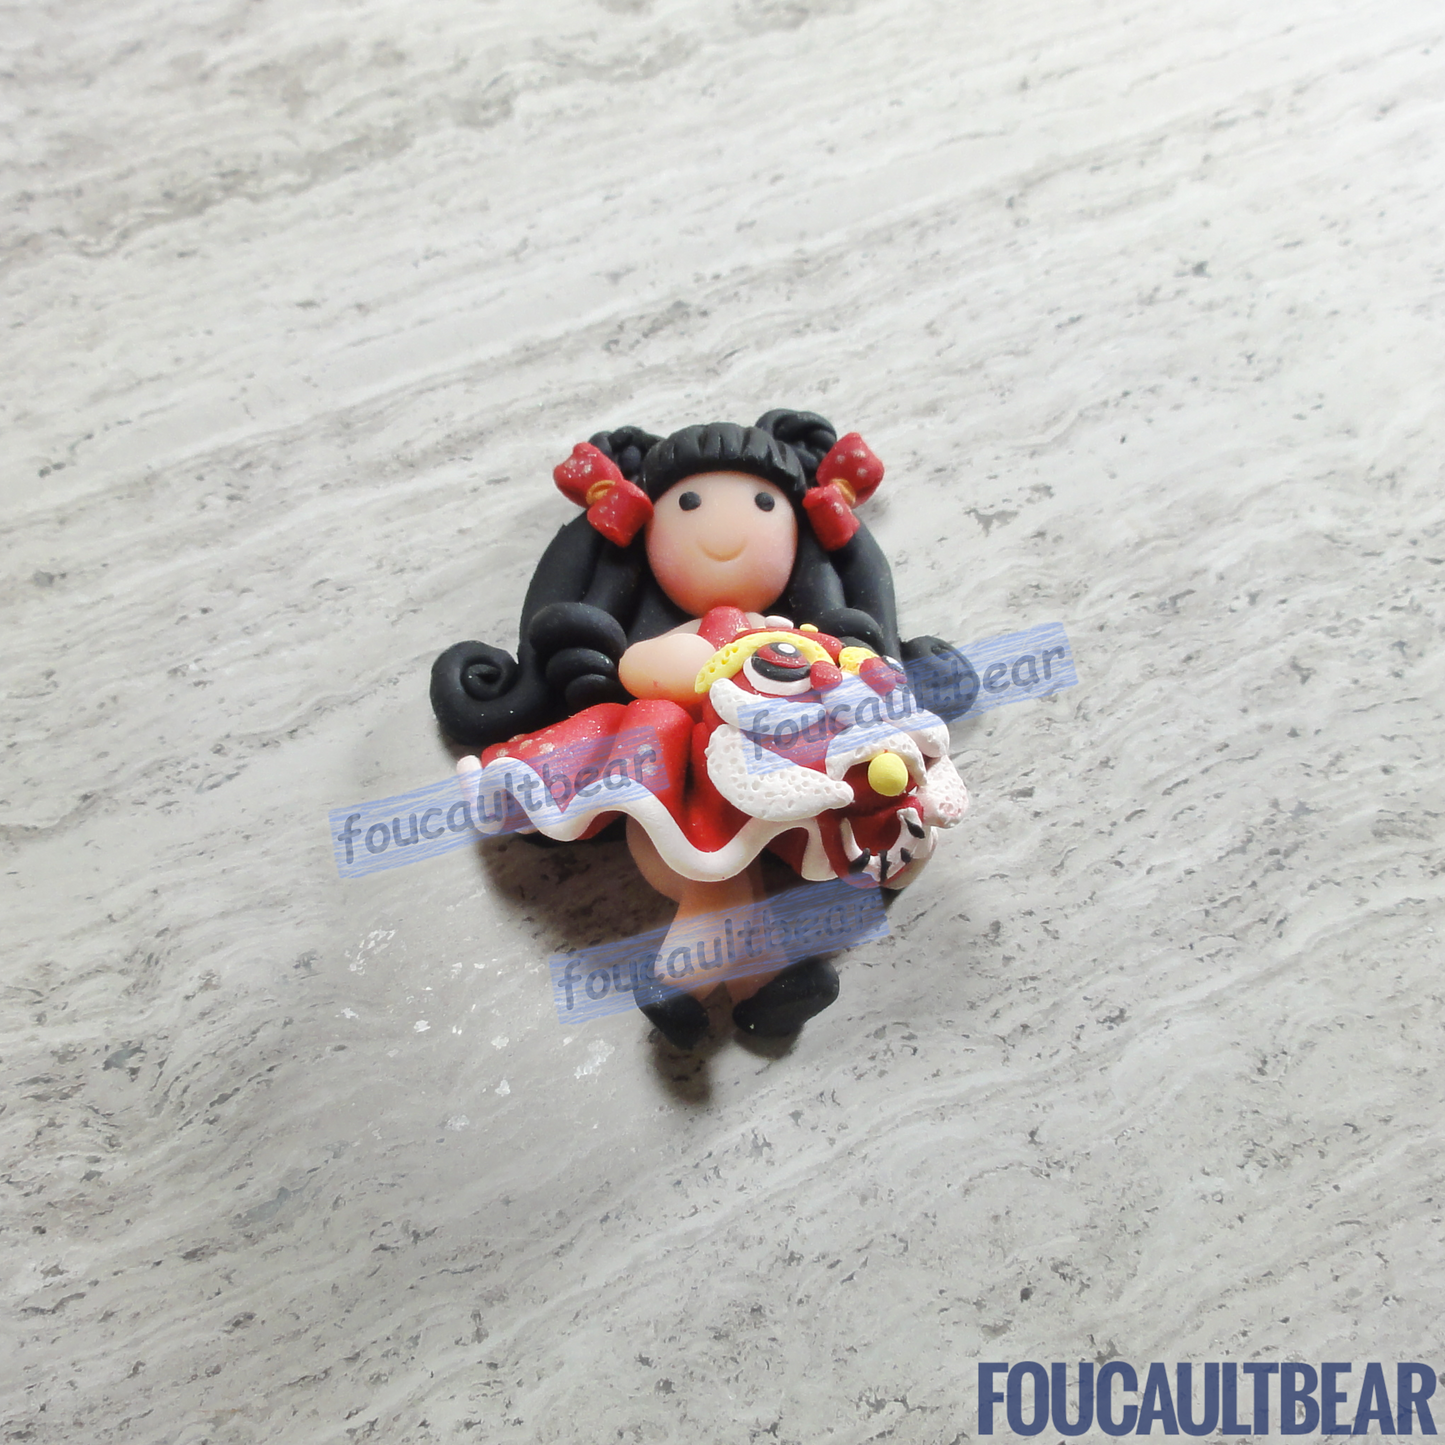 Foucaultbear's HANDMADE CLAY ART FLATBACK. Lunar Chinese New Year Girl (Black Hair) with Lion (Medium). Handmade Polymer Clay Art. For Your Own Creative Use, such as on Hair Bow Barrette Clips, Picture Frames and Refrigerator Magnets. This medium sized flatback clay Lunar Chinese New Year Girl (Black Hair) with Lion looks good as a hair centerpiece. Great for any of your art projects, too.